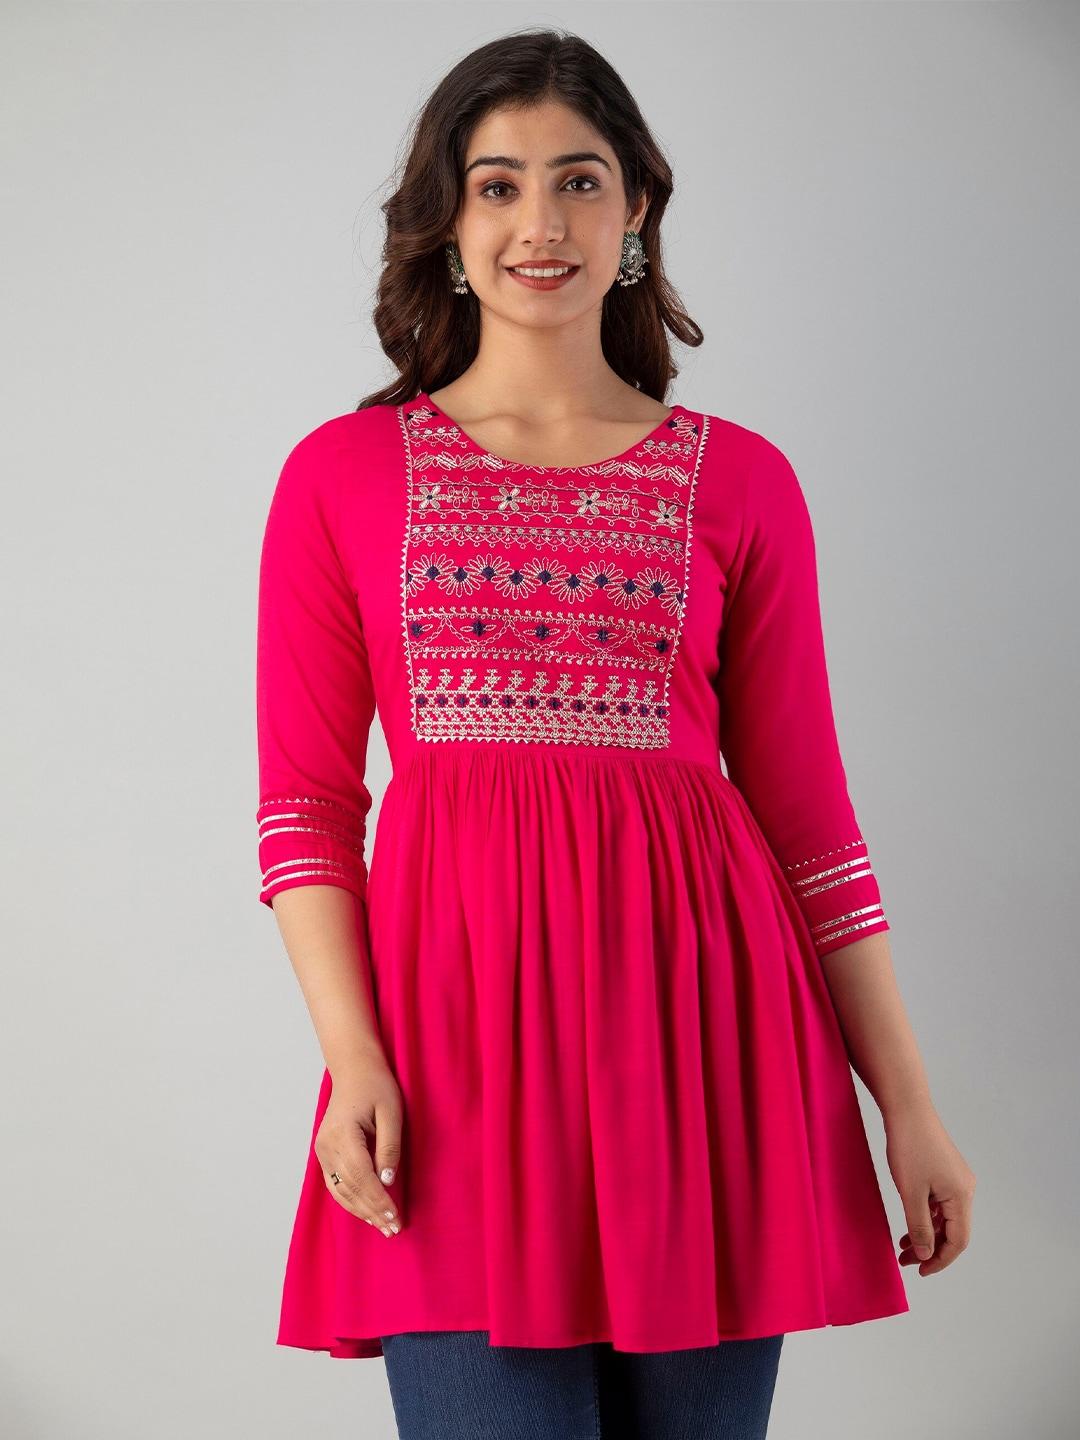 ckm-pink-&-silver-toned-embroidered-longline-top